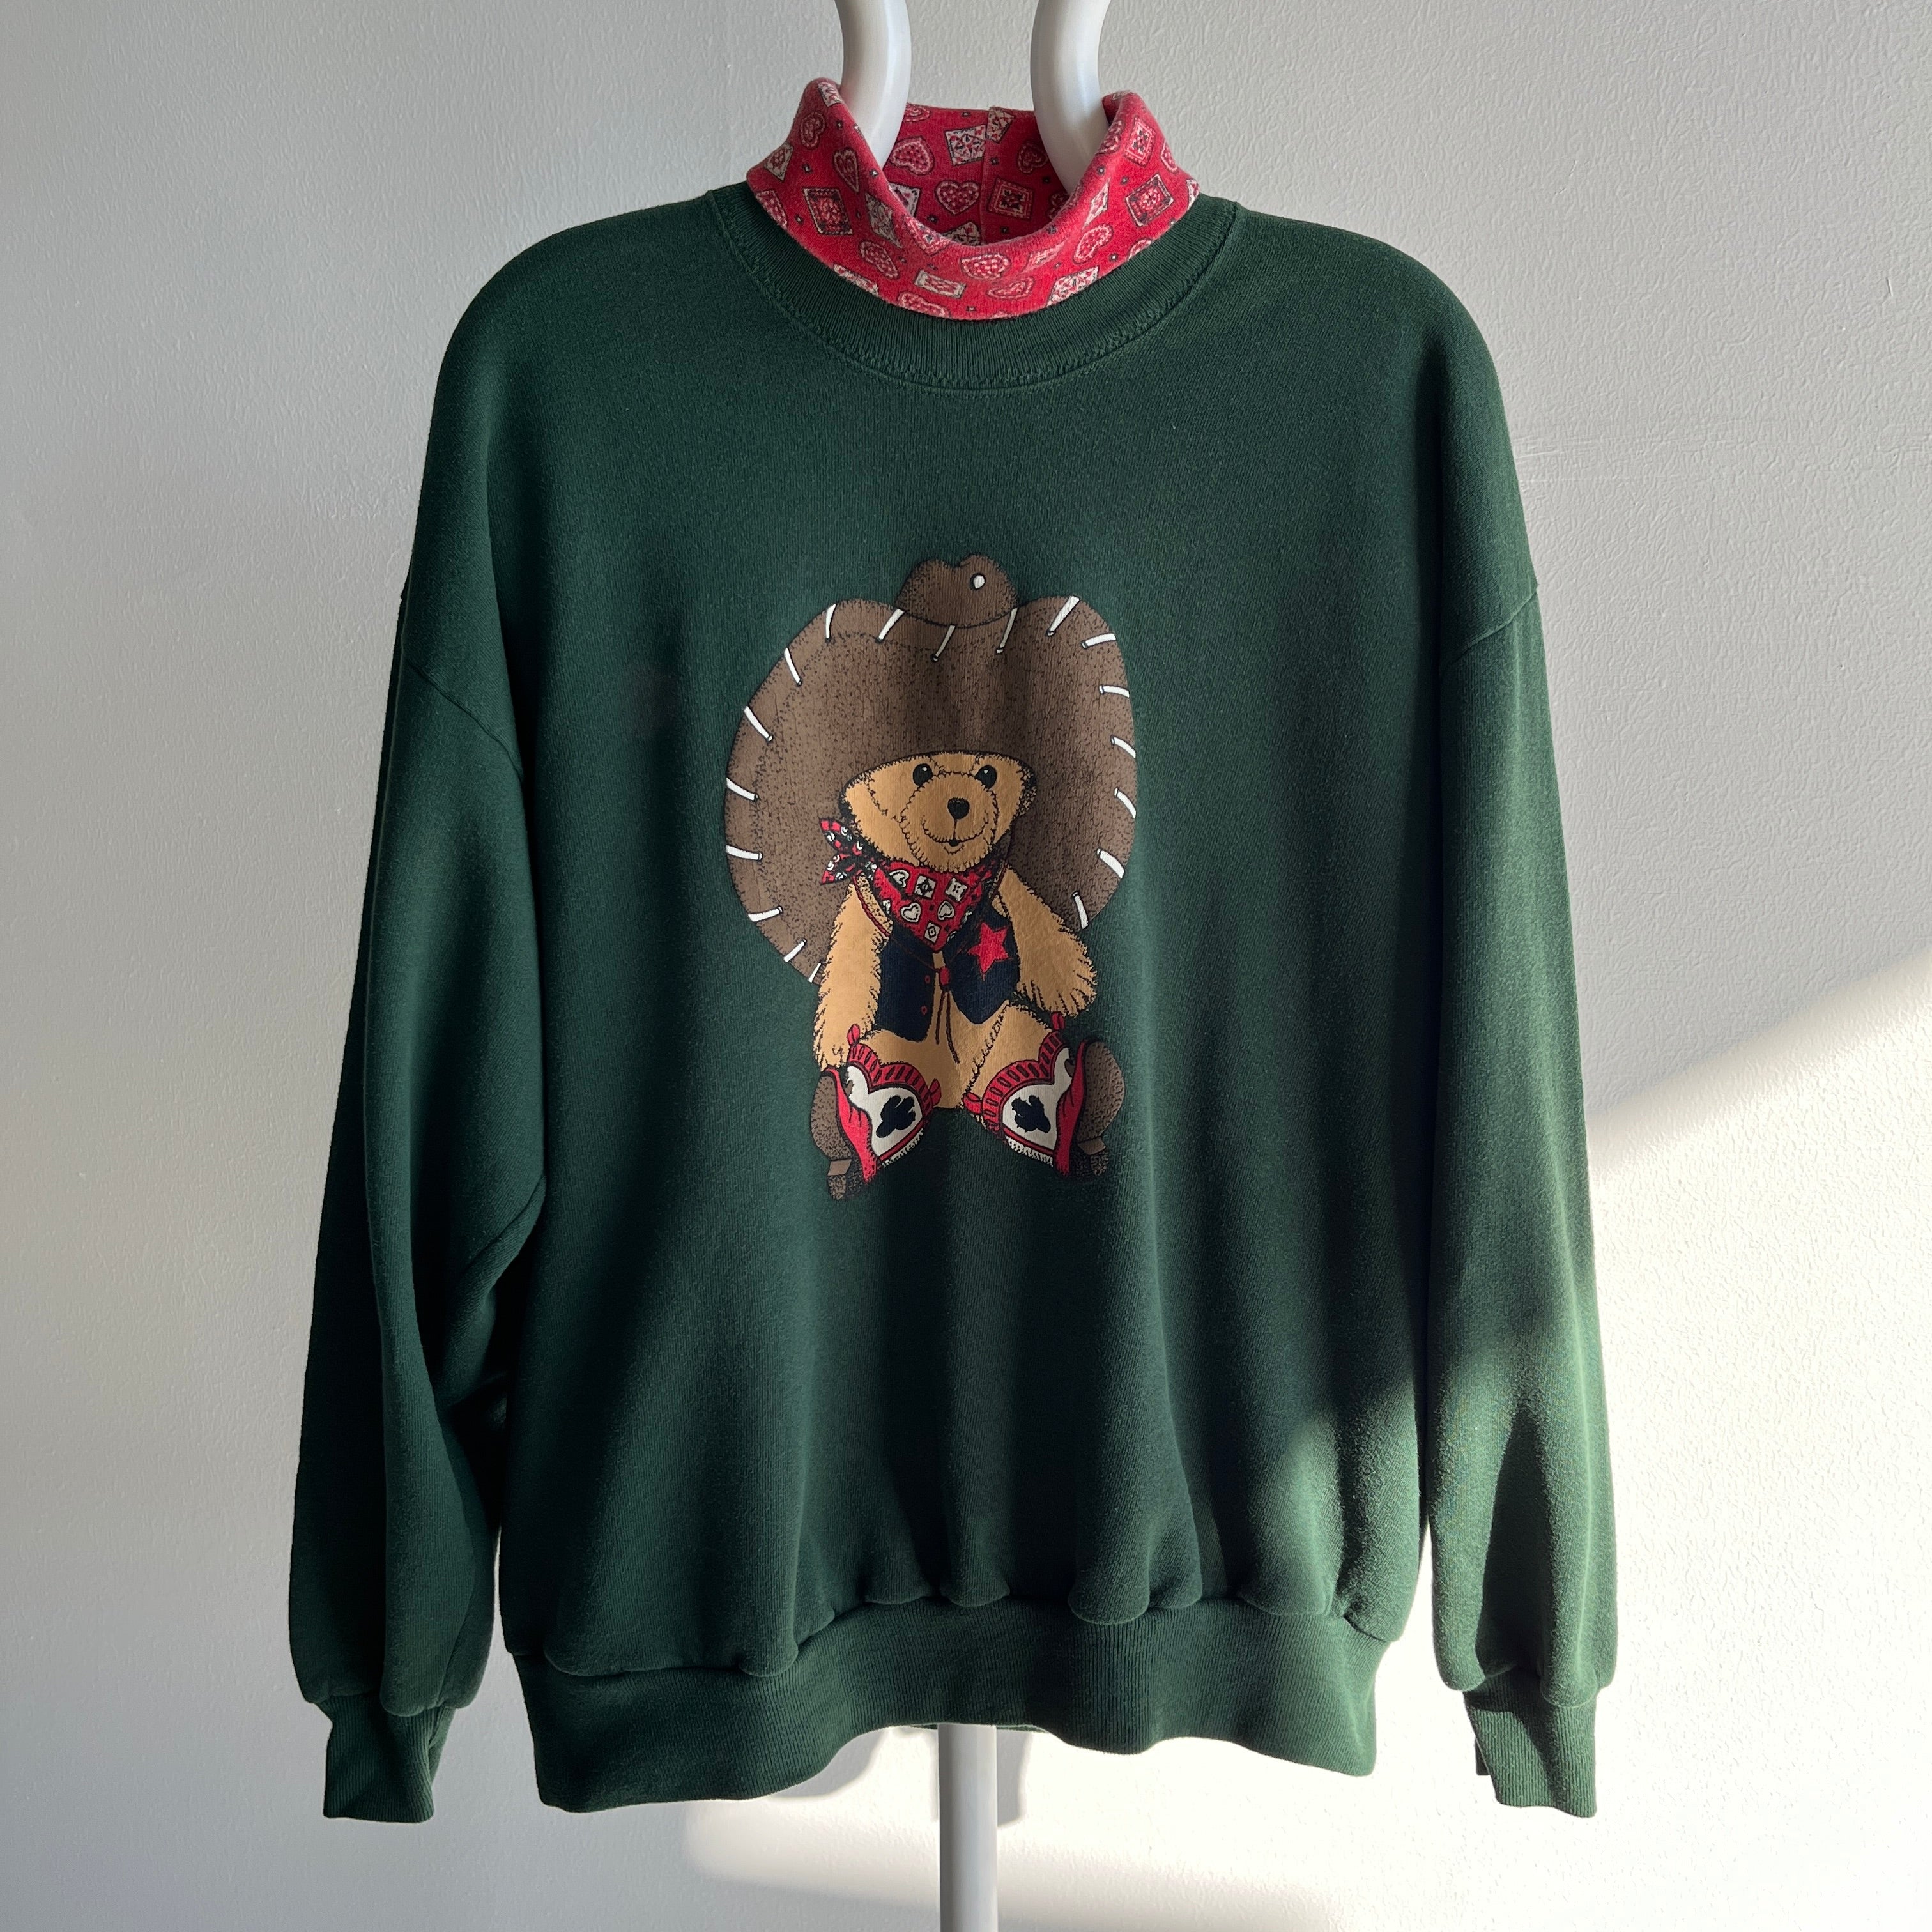 1980s Built In Turtle Neck Cowboy Teddy Bear Sweatshirt - Yes, This Exists